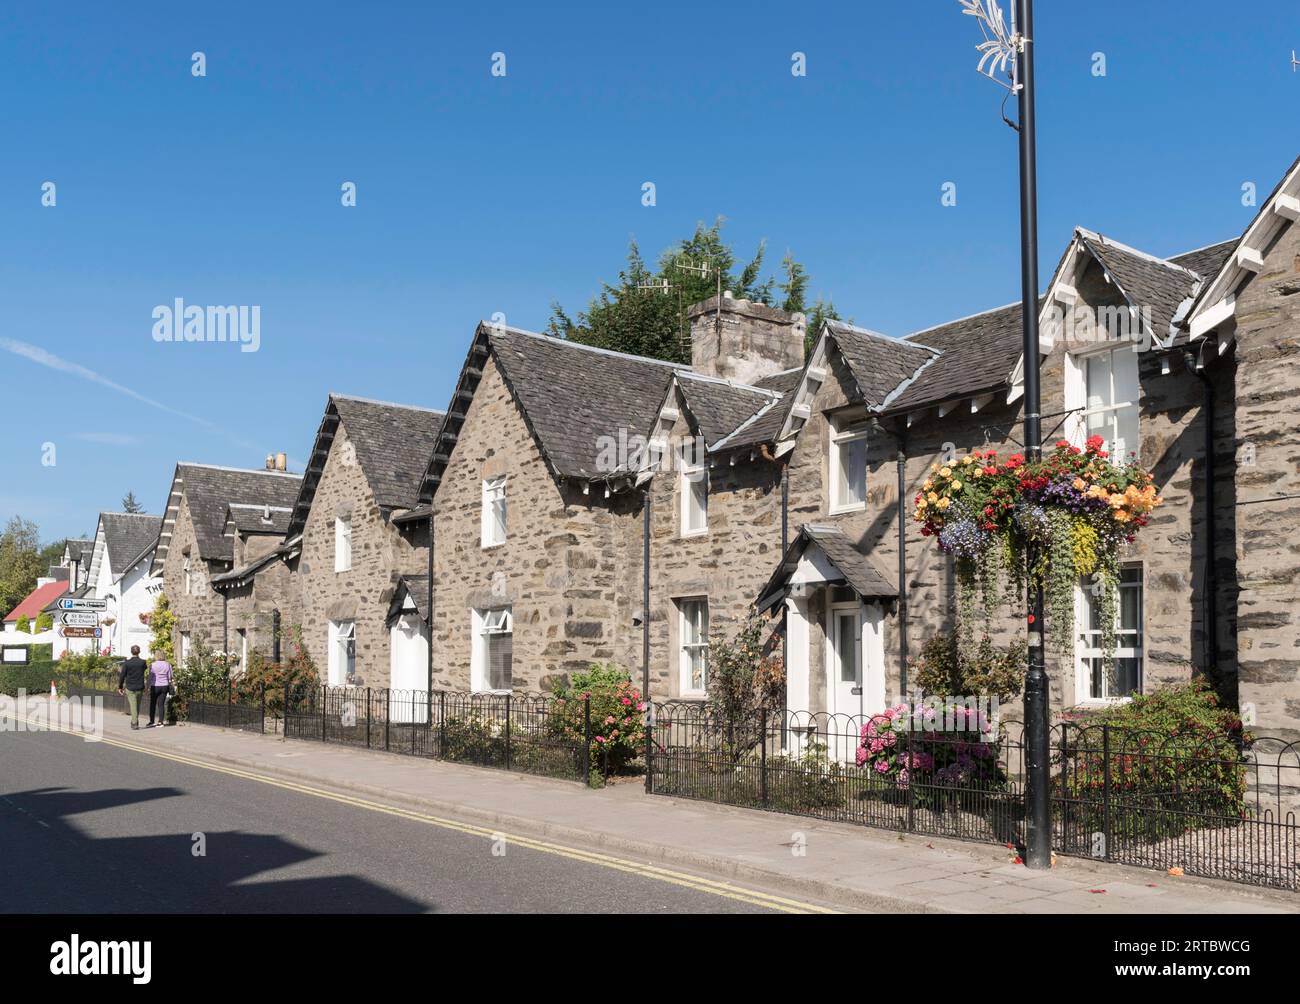 A row of stone cottages in Pitlochry, Scotland, UK Stock Photo